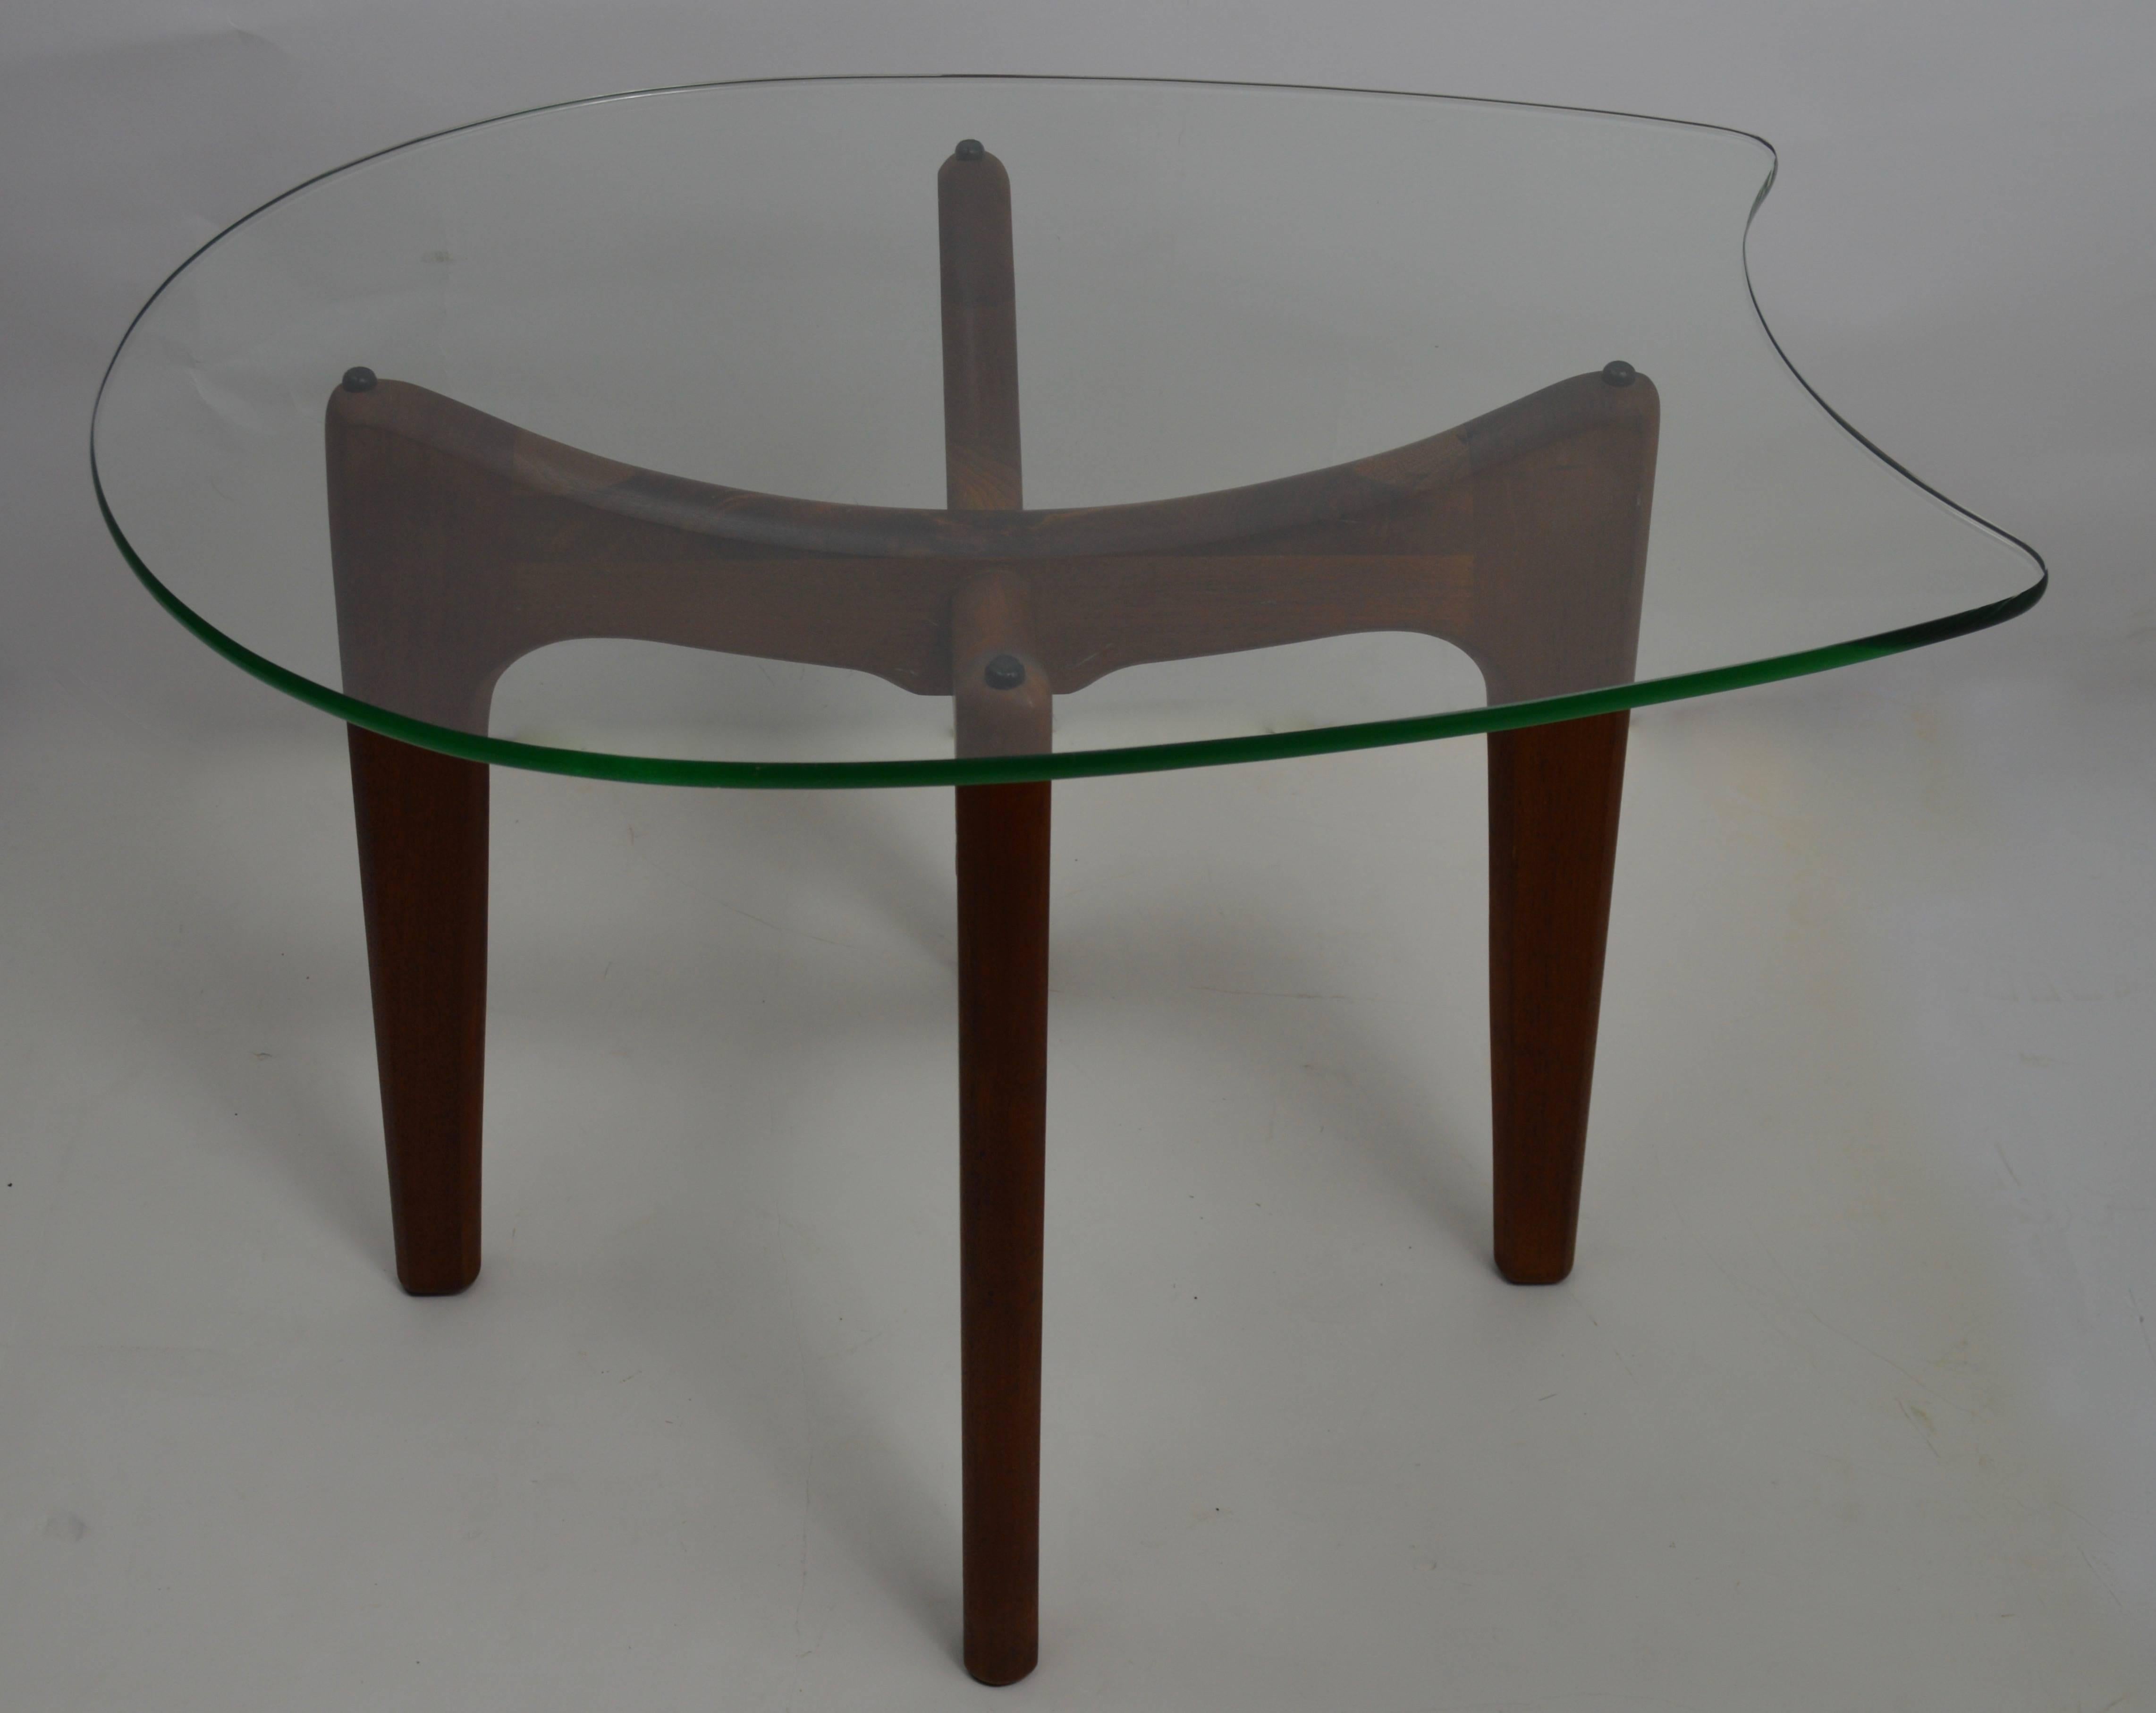 Classic glass top table with sculptural wood base designed by Adrian Pearsall for Craft Associates.
This example is in very fine, clean and original condition, ready to use.
Glass top .50 in. thick.
 
 